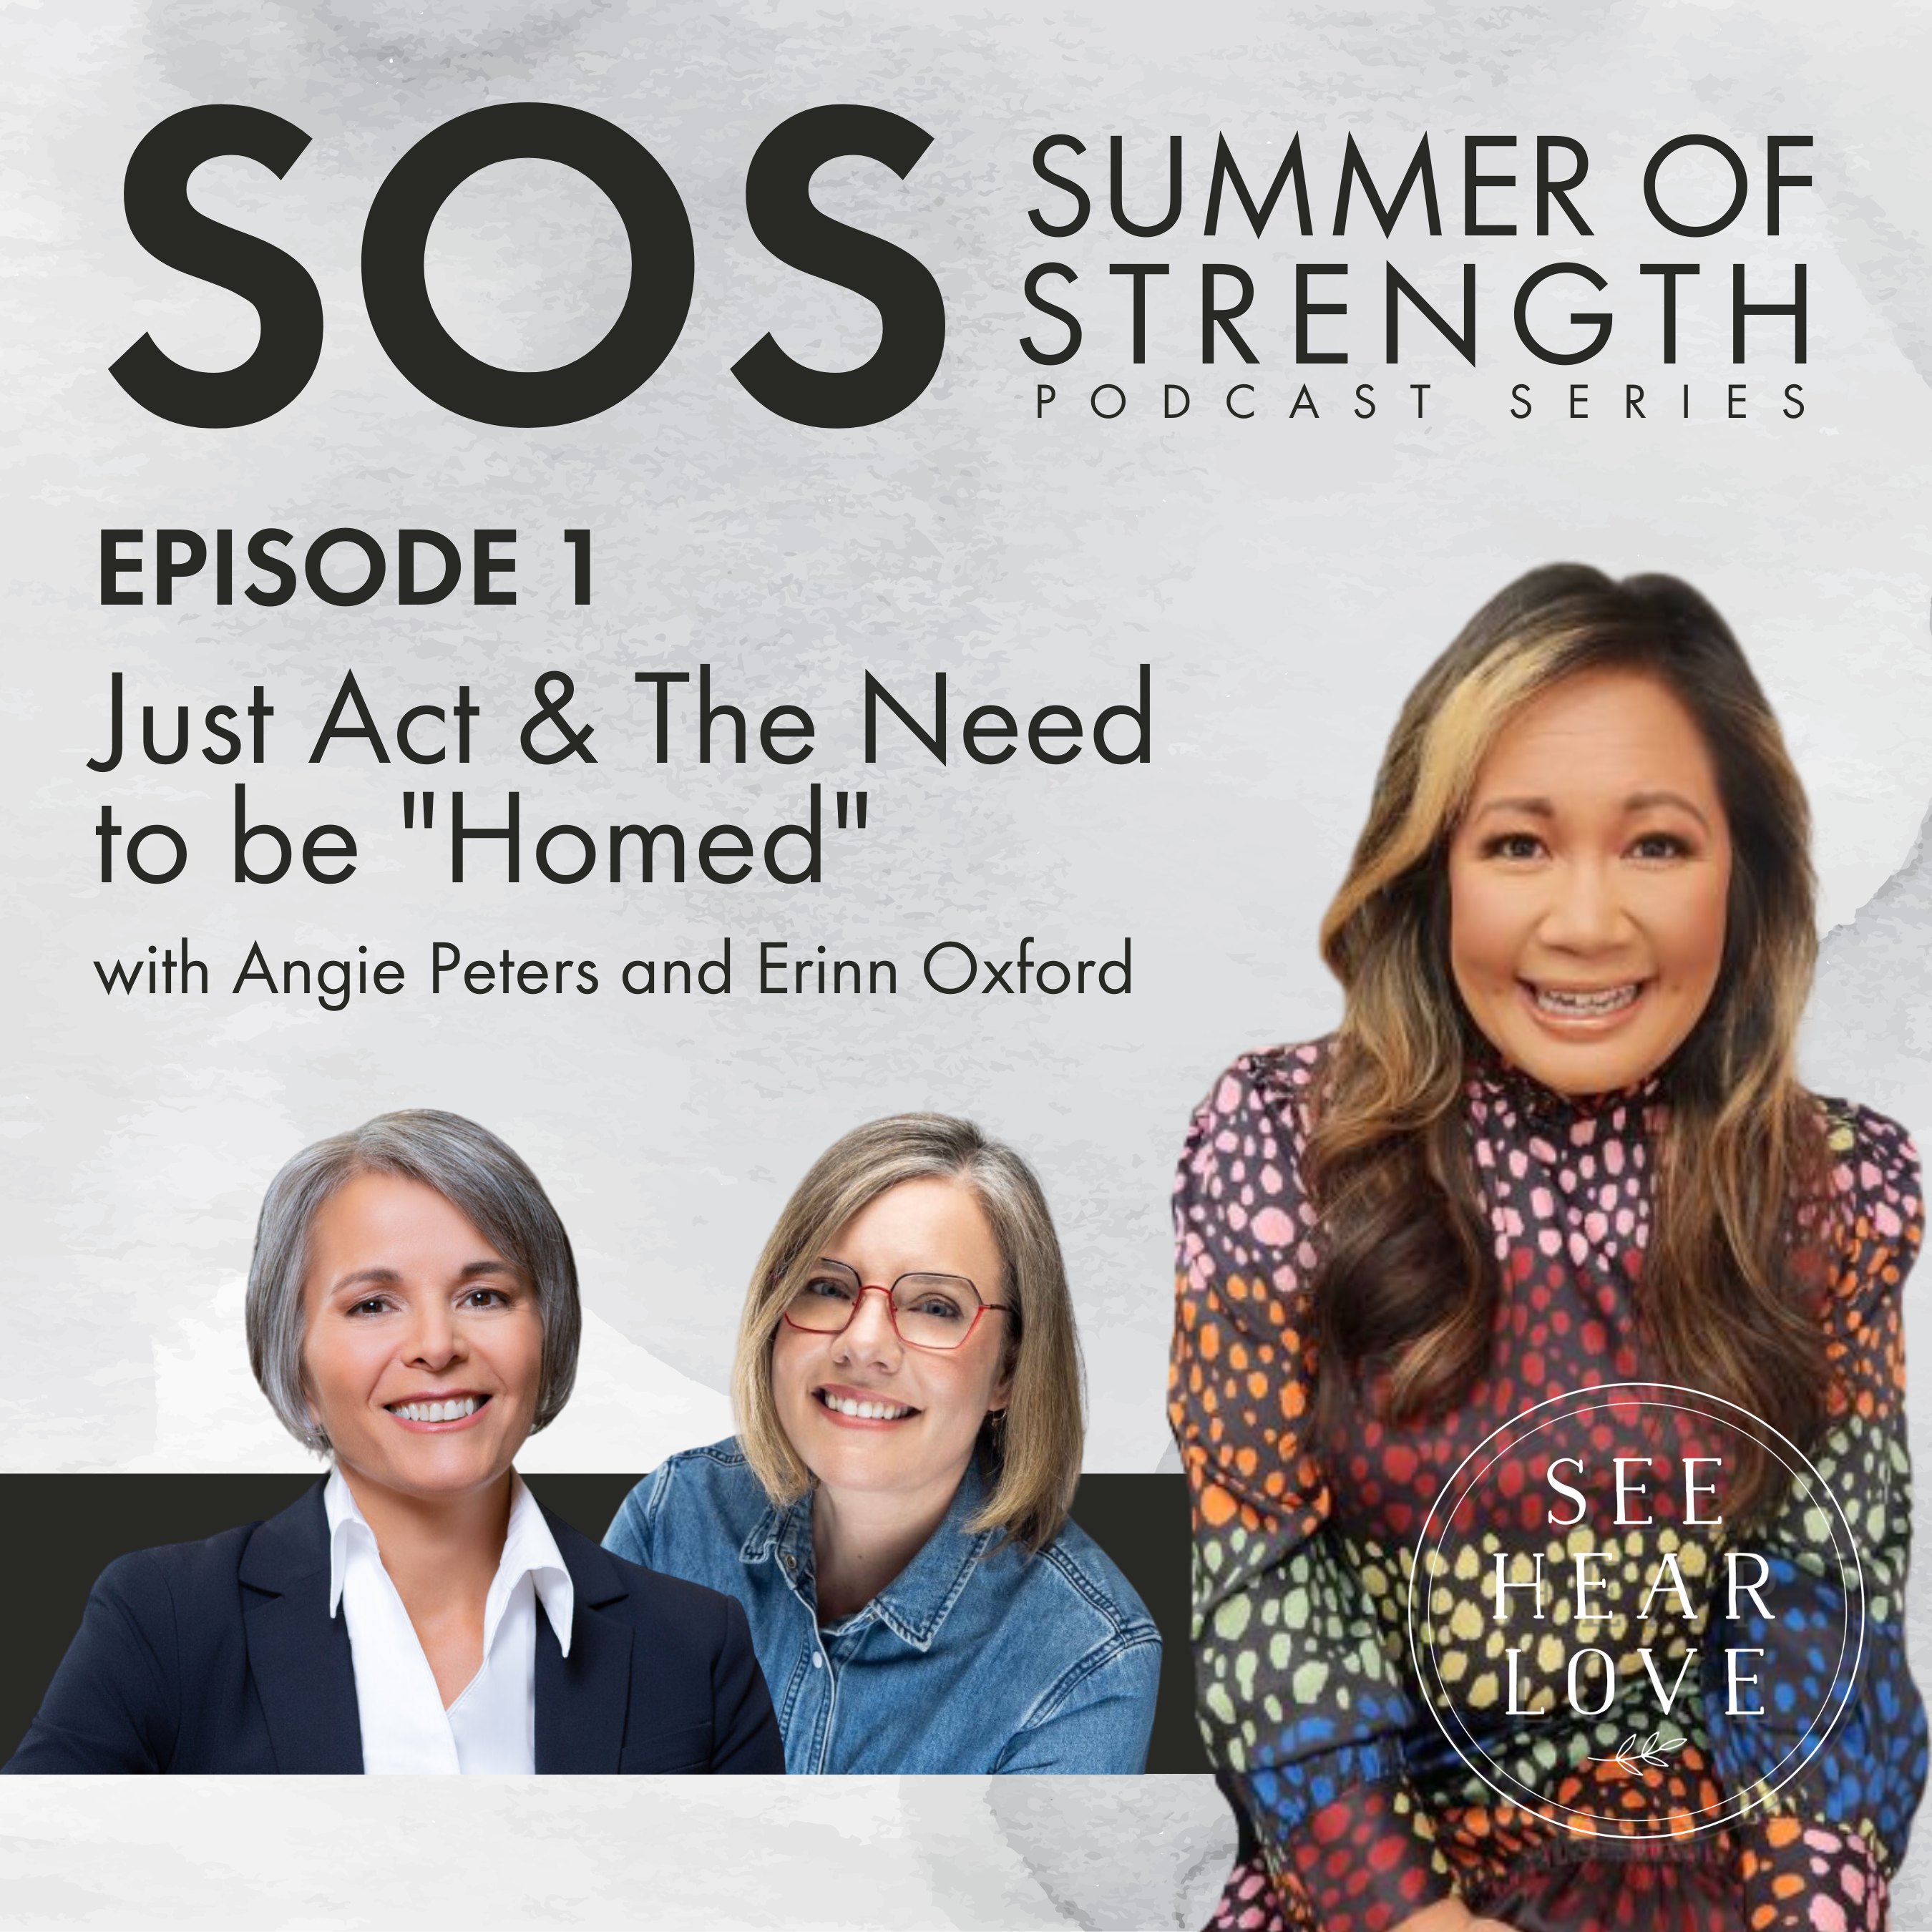 Season 9: SOS Podcast Ep. 1 Just Act & The Need to be "Homed" with Angie Peters & Erinn Oxford